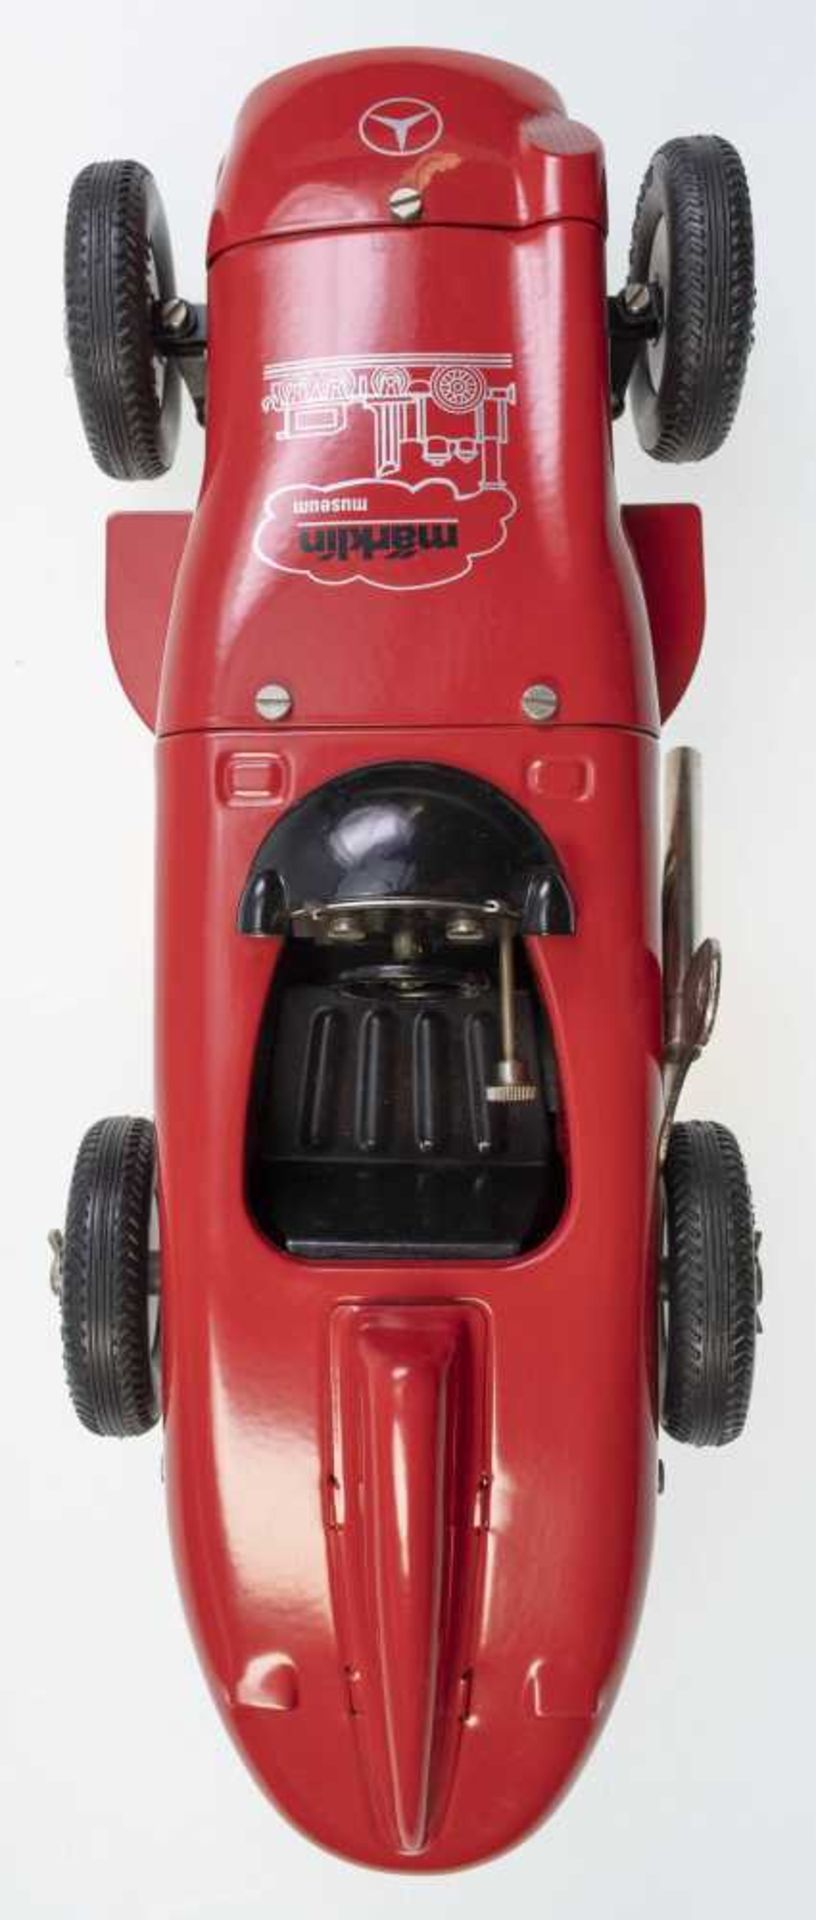 Our Lady of Ransom BENZ W 196, red, approximate 1: 16, special edition model no. 11021, original pac - Image 3 of 7